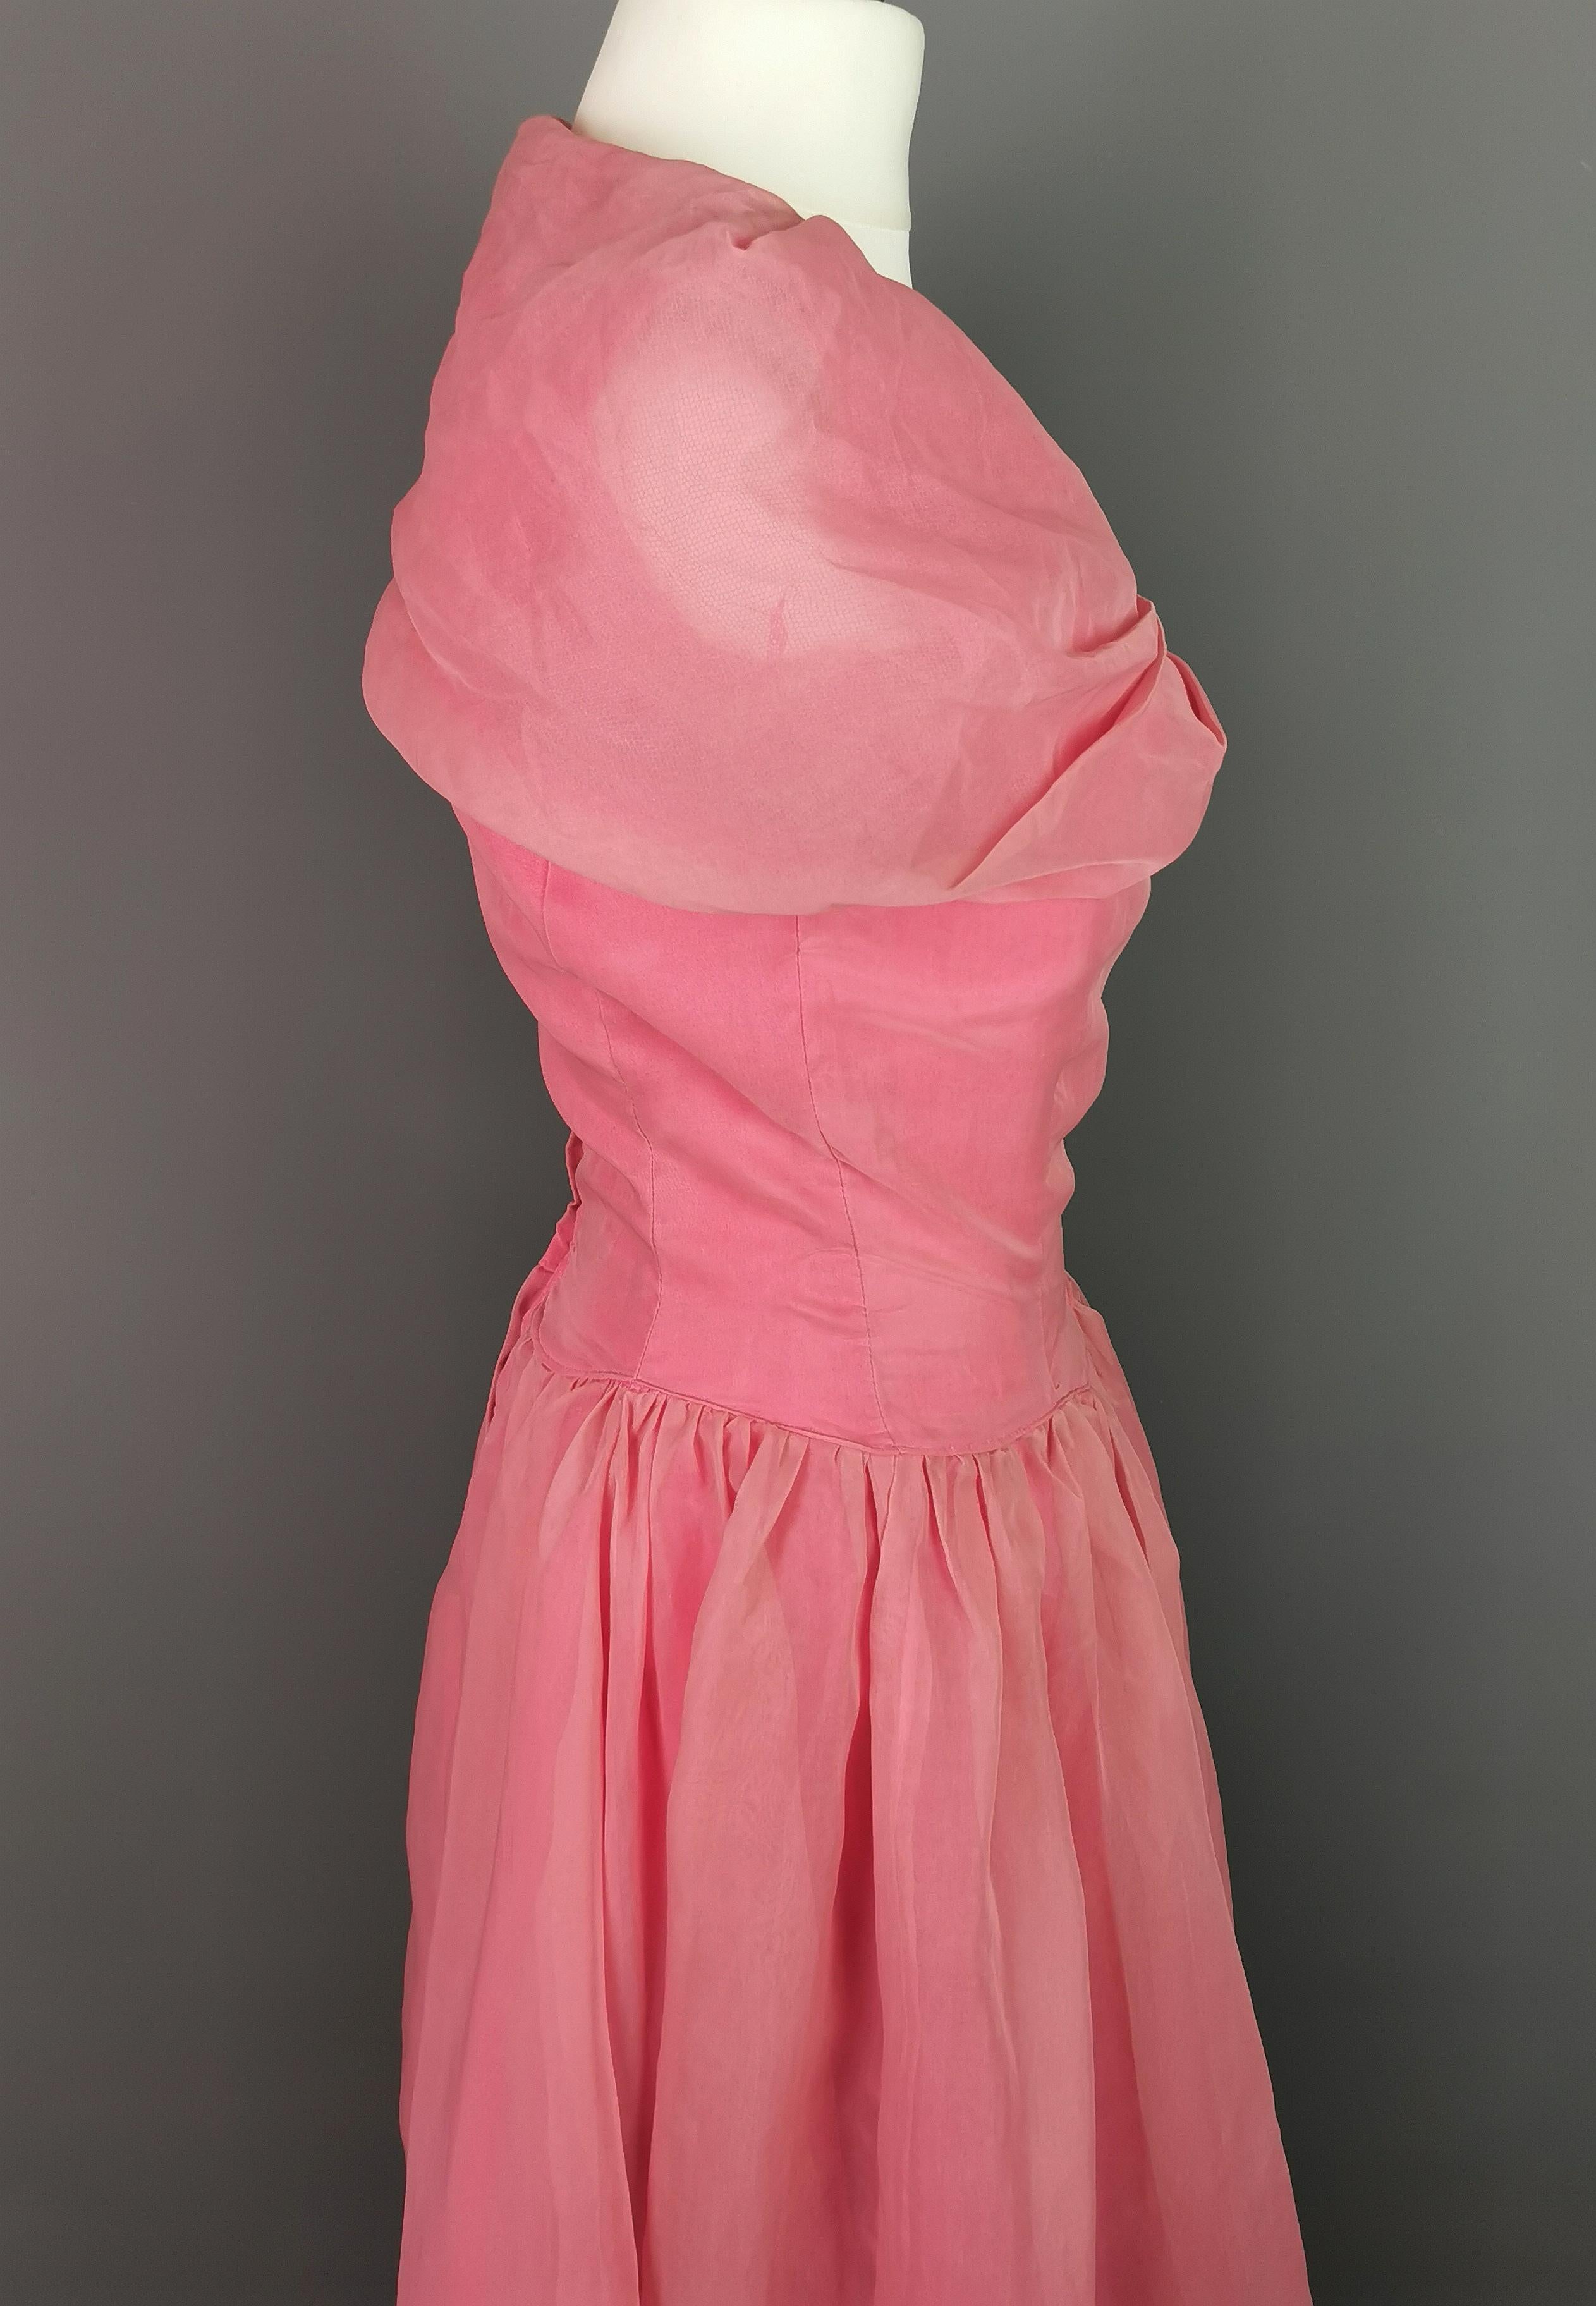 Vintage 1950s pink chiffon organza party dress, prom style  For Sale 8